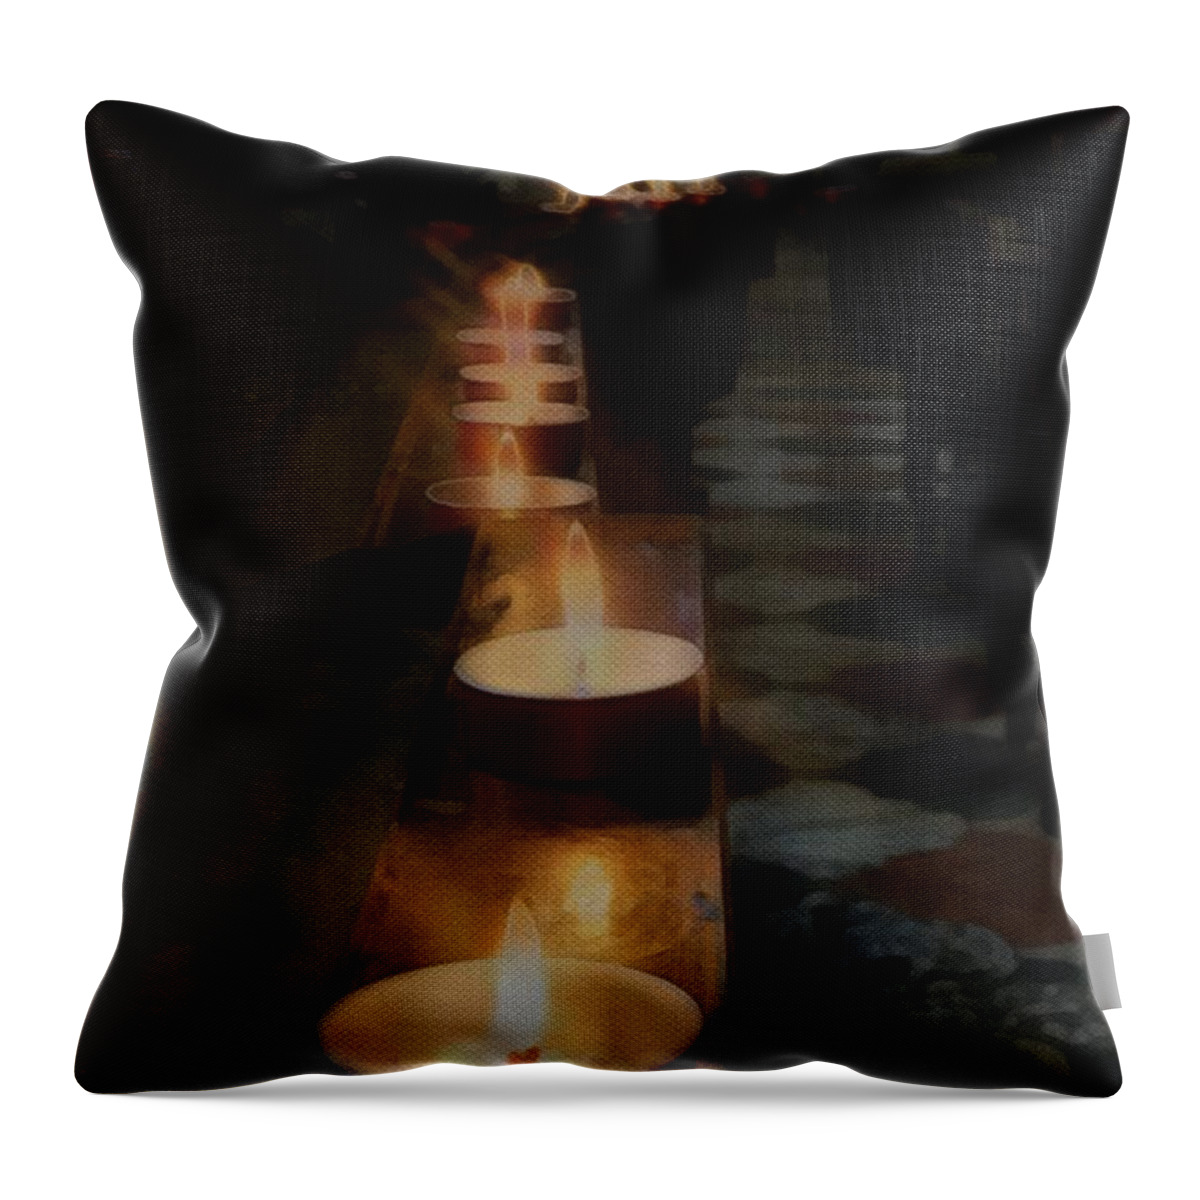 Candles Throw Pillow featuring the digital art Light a Candle by Diana Rajala